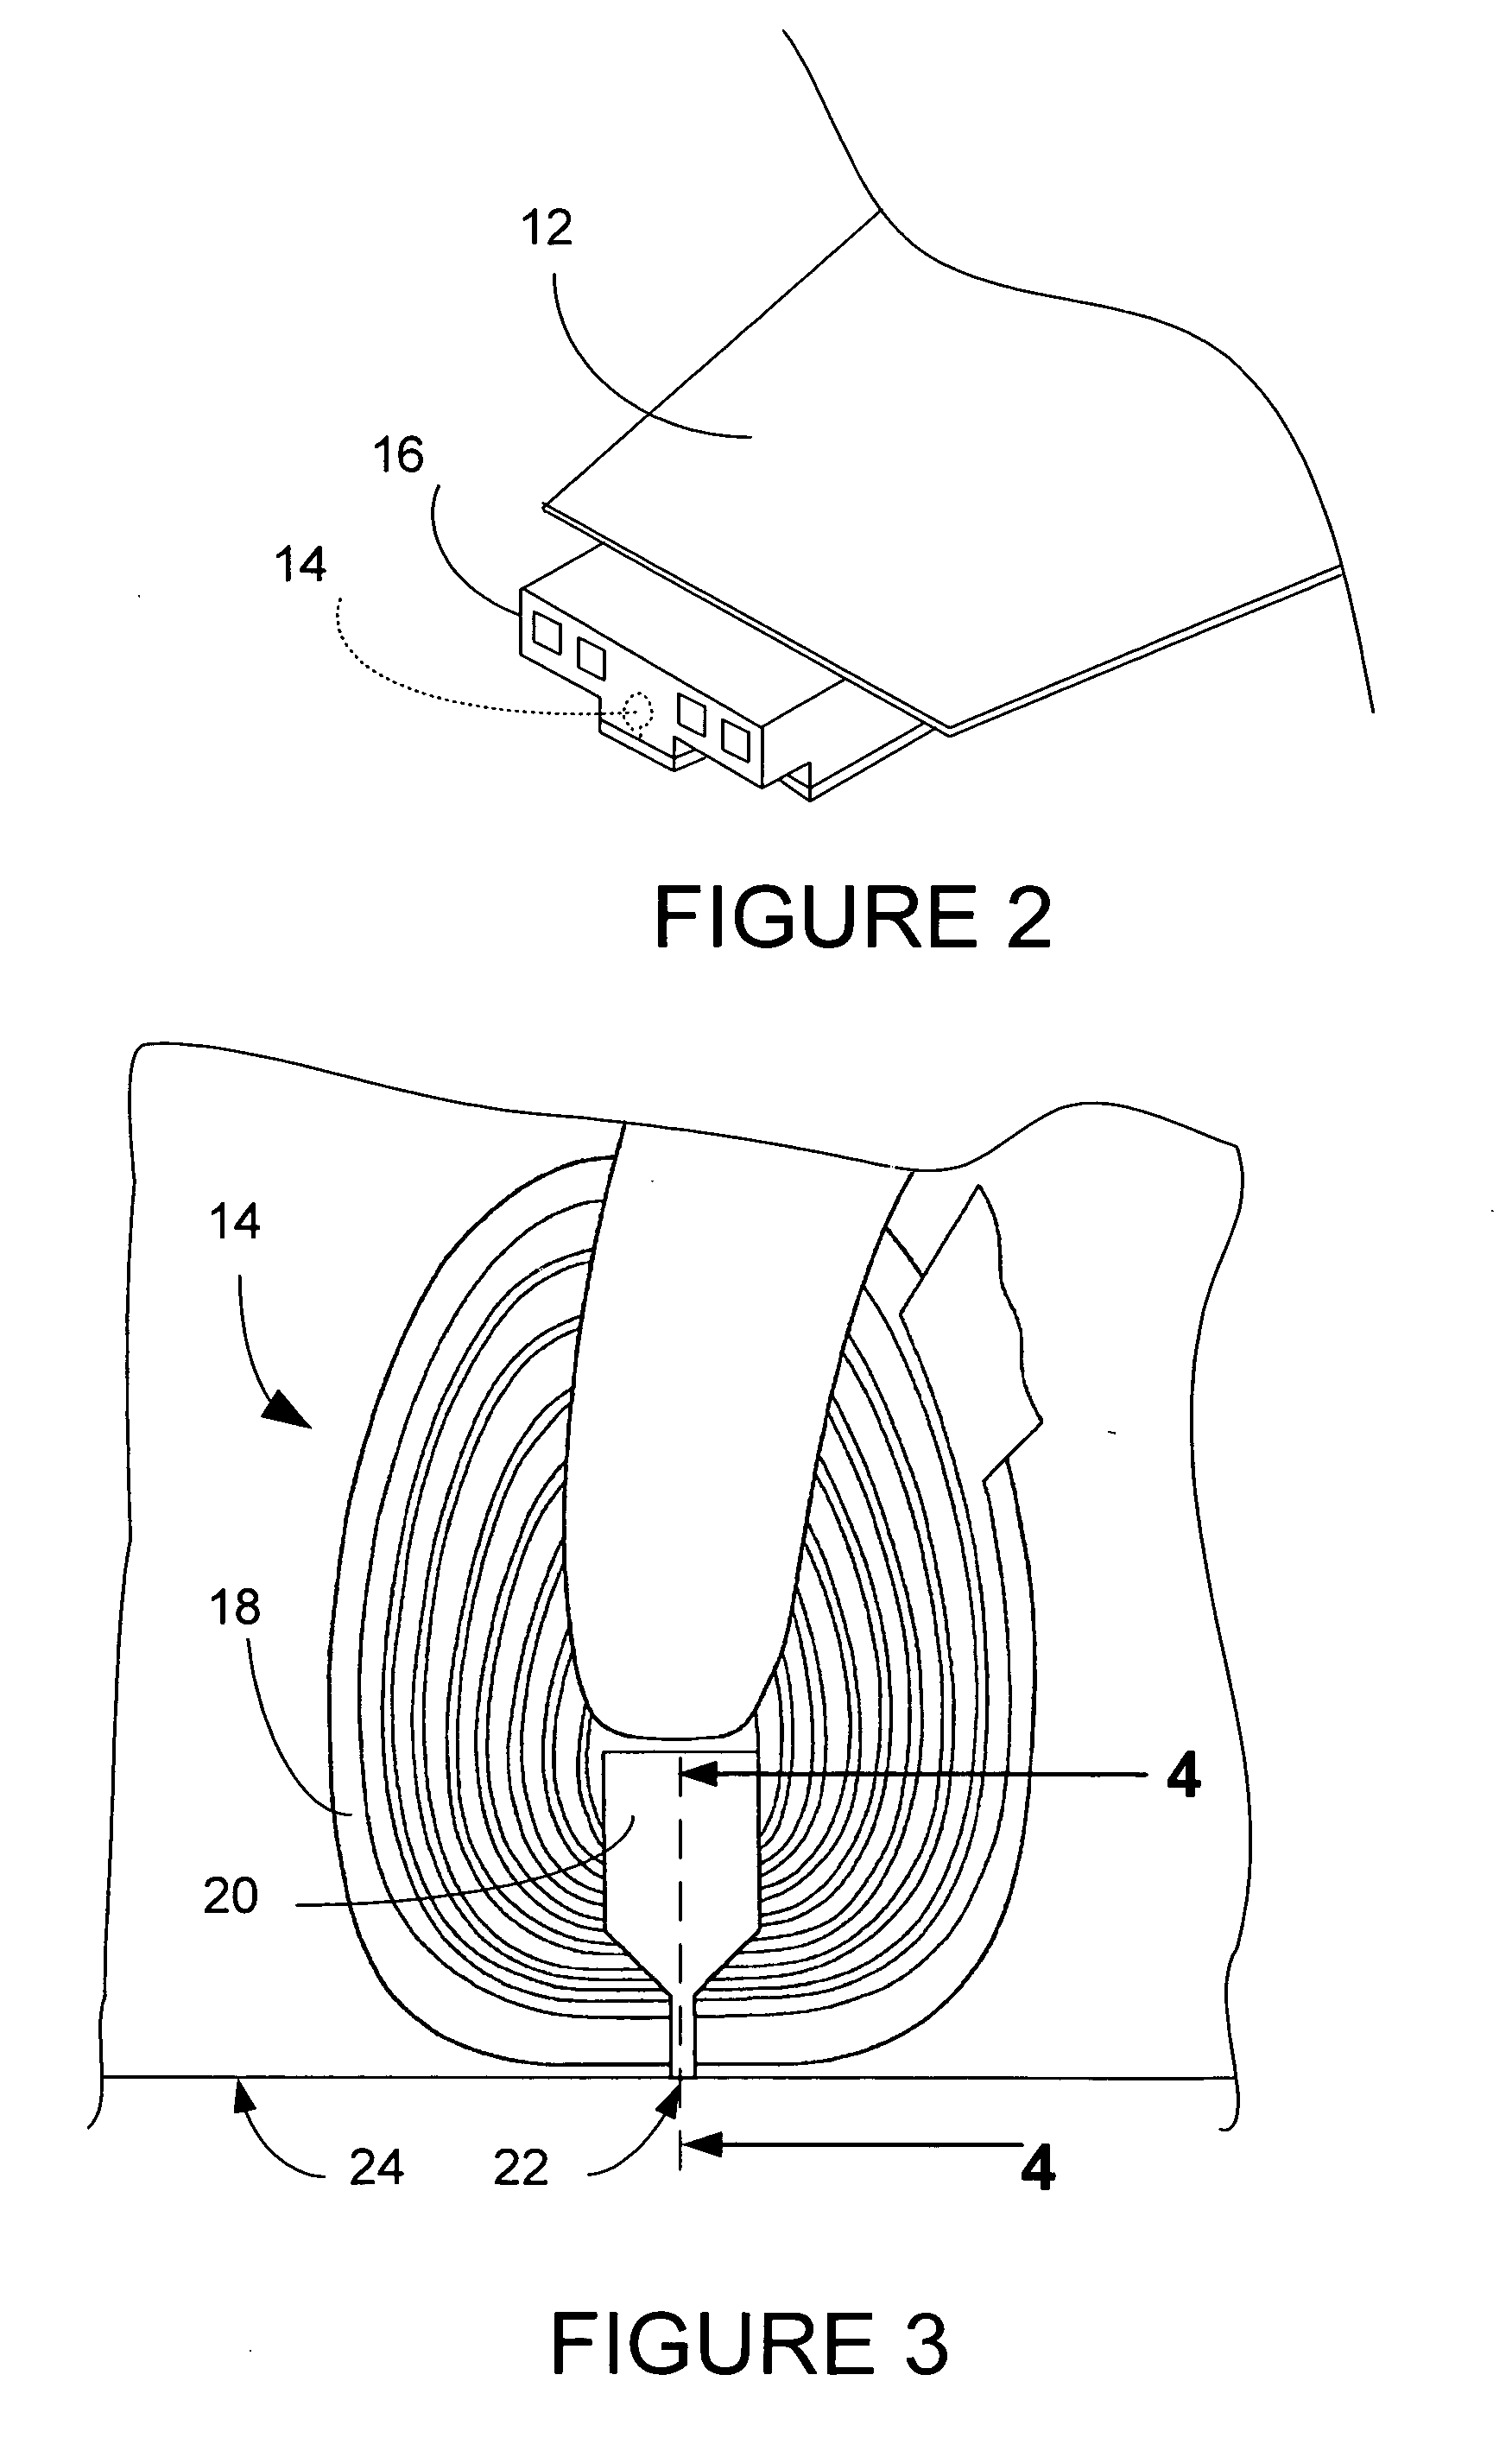 Read head having shaped read sensor-biasing layer junctions using partial milling and method of fabrication